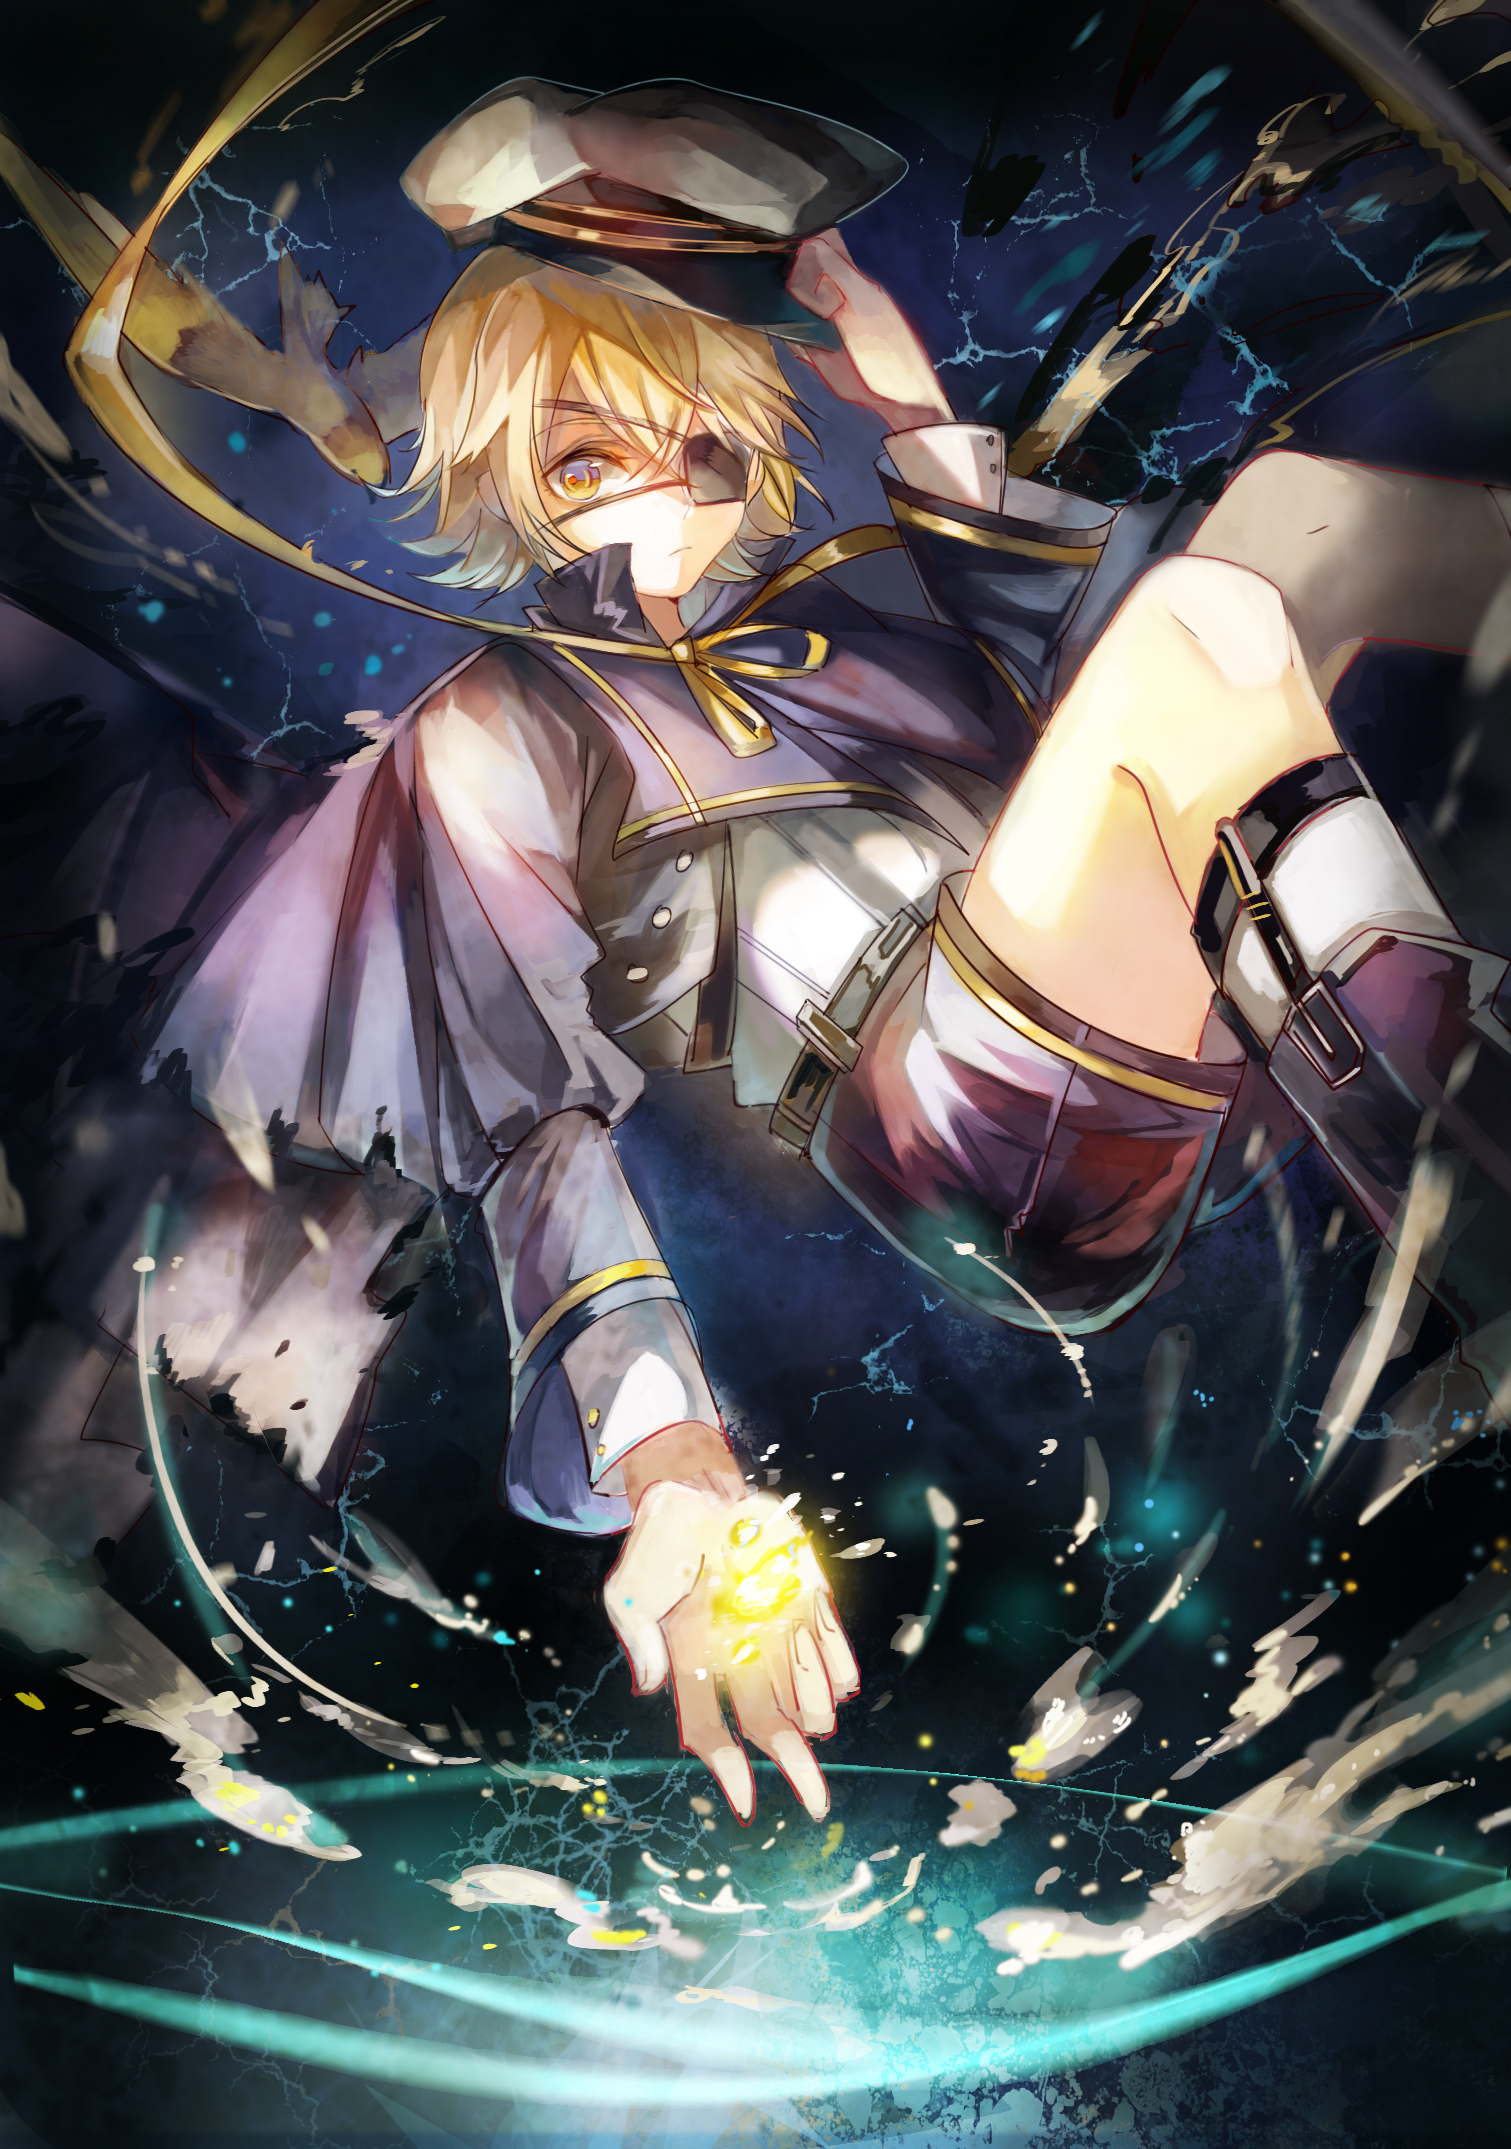 Vocaloid Oliver Wallpapers Wallpaper Cave